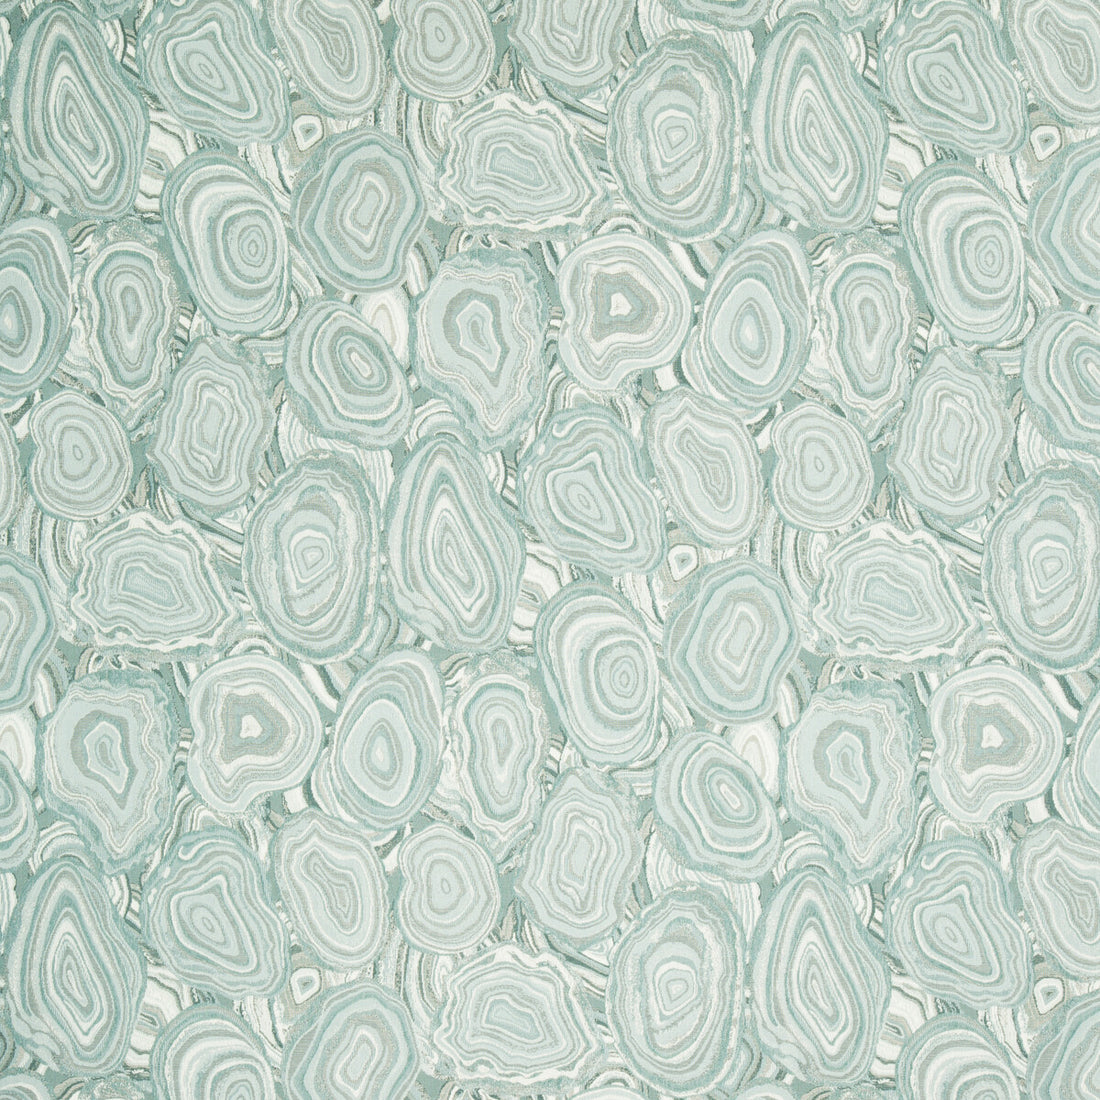 Kravet Design fabric in 34707-315 color - pattern 34707.315.0 - by Kravet Design in the Crypton Home collection